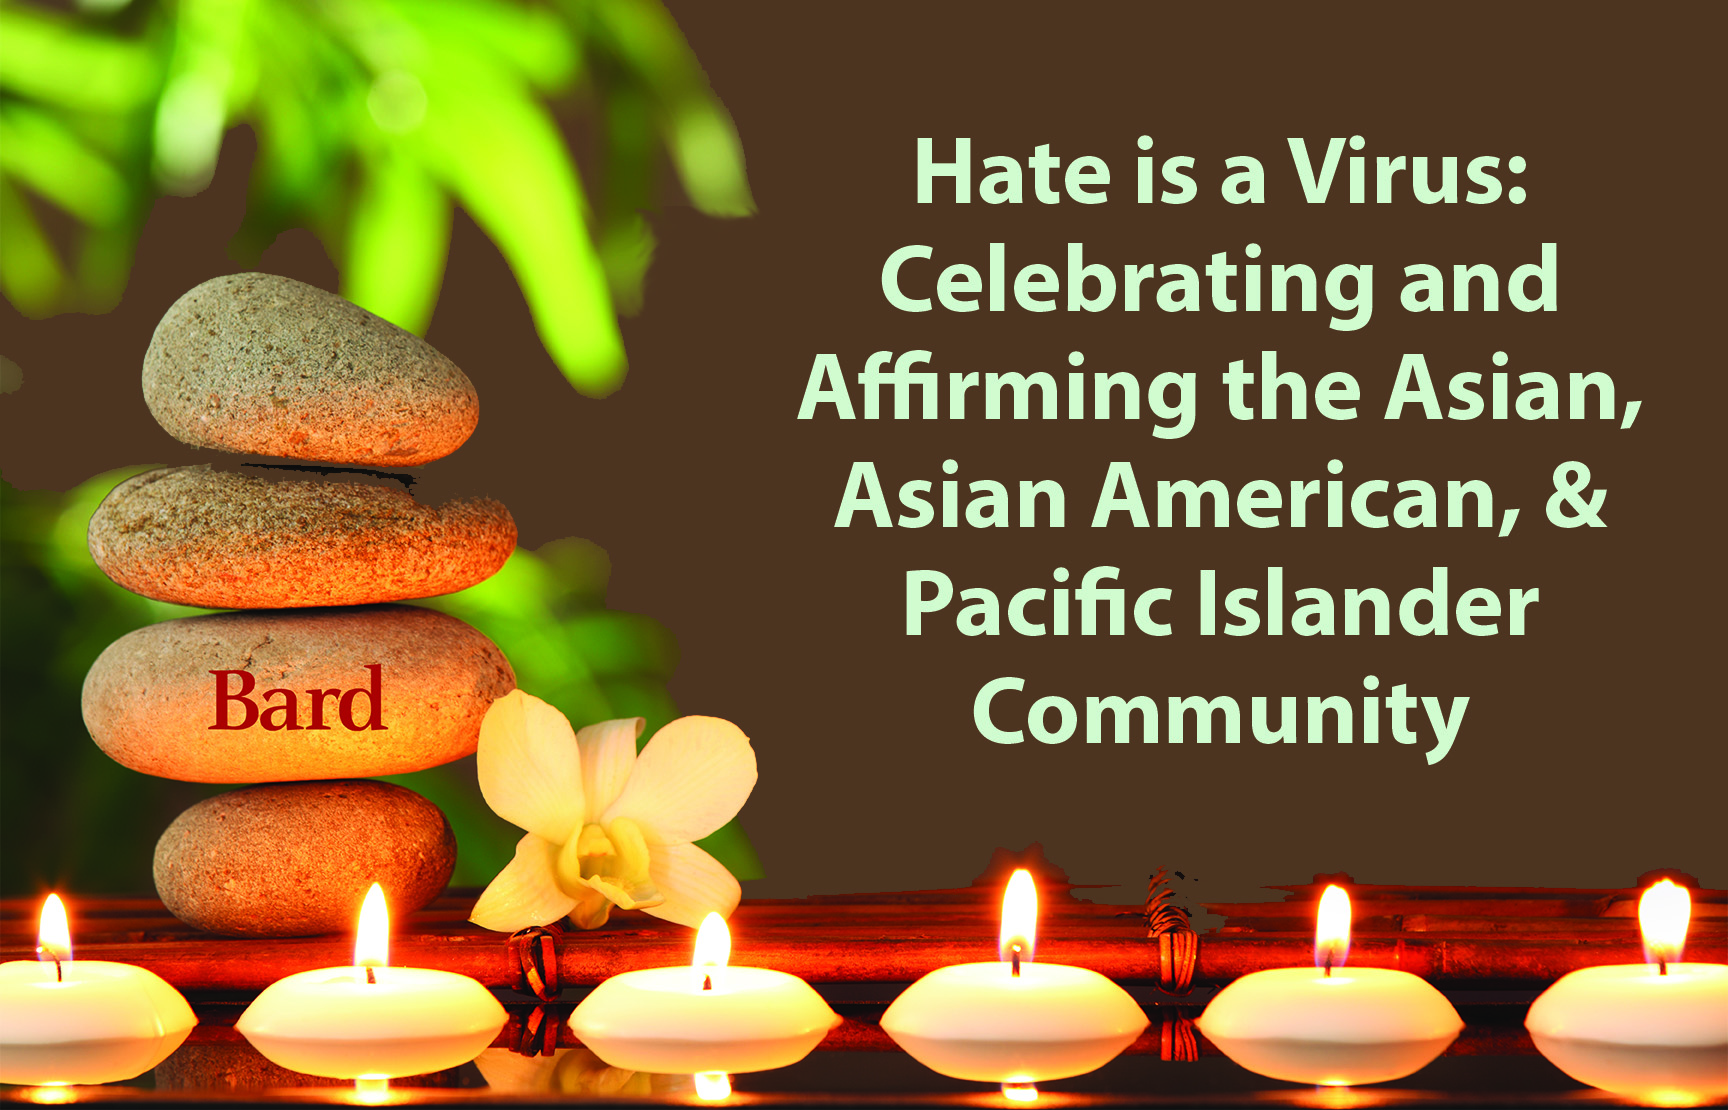 Hate Is a Virus: Celebrating and Affirming the Asian, Asian American, and Pacific Islander Community